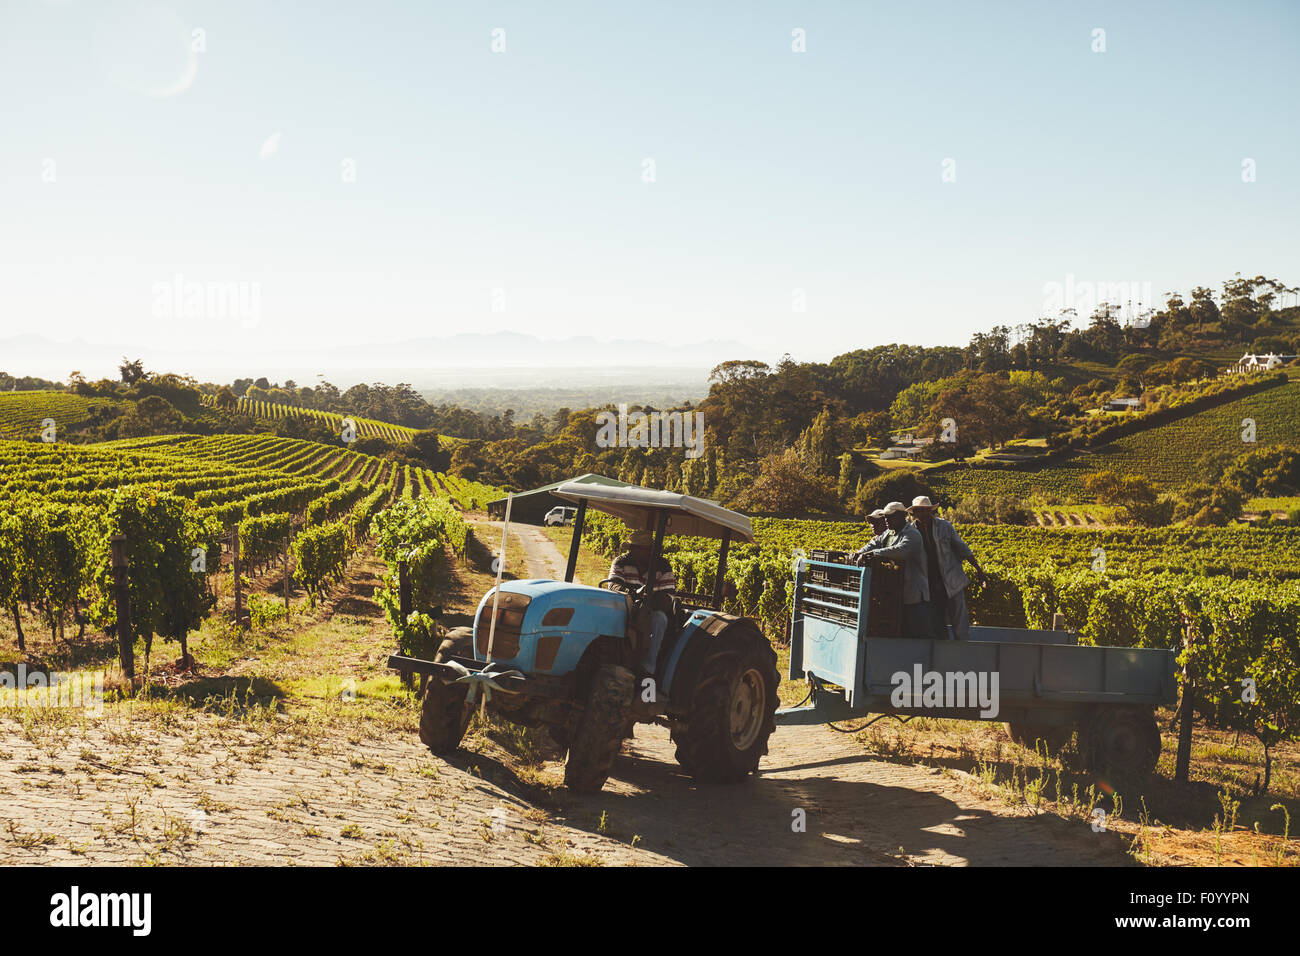 Vineyard workers transporting fresh harvest to wine factory through a tractor trailer. Grape picker truck transporting grapes fr Stock Photo